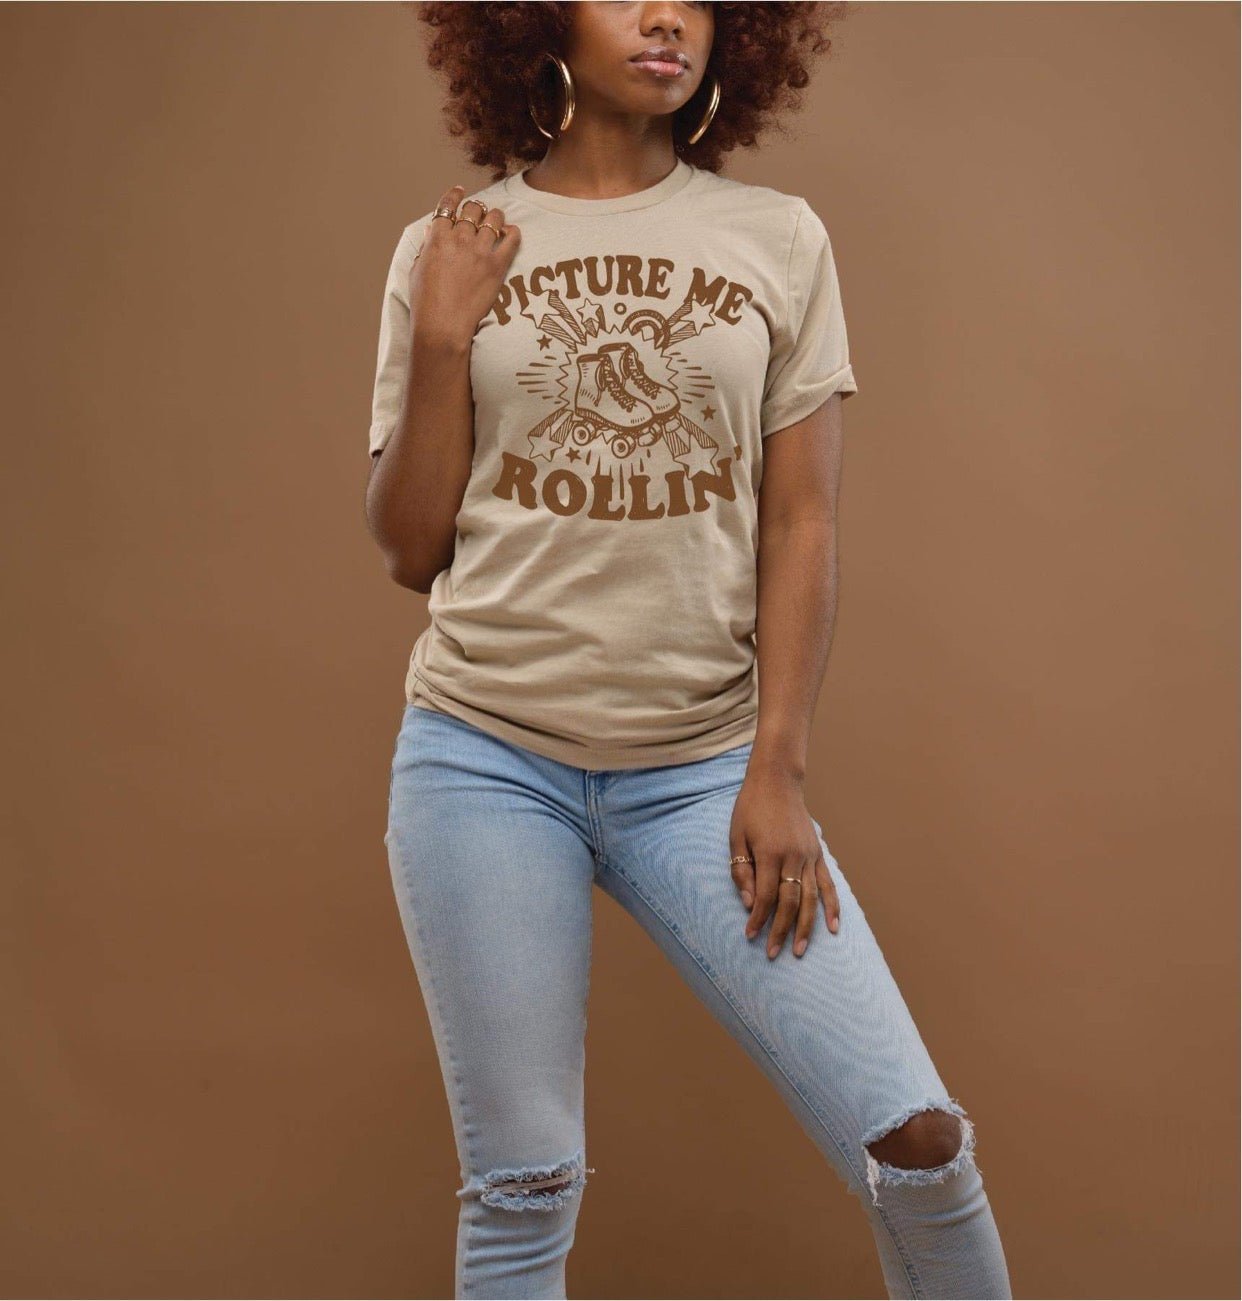 "Picture Me Rollin" Tee